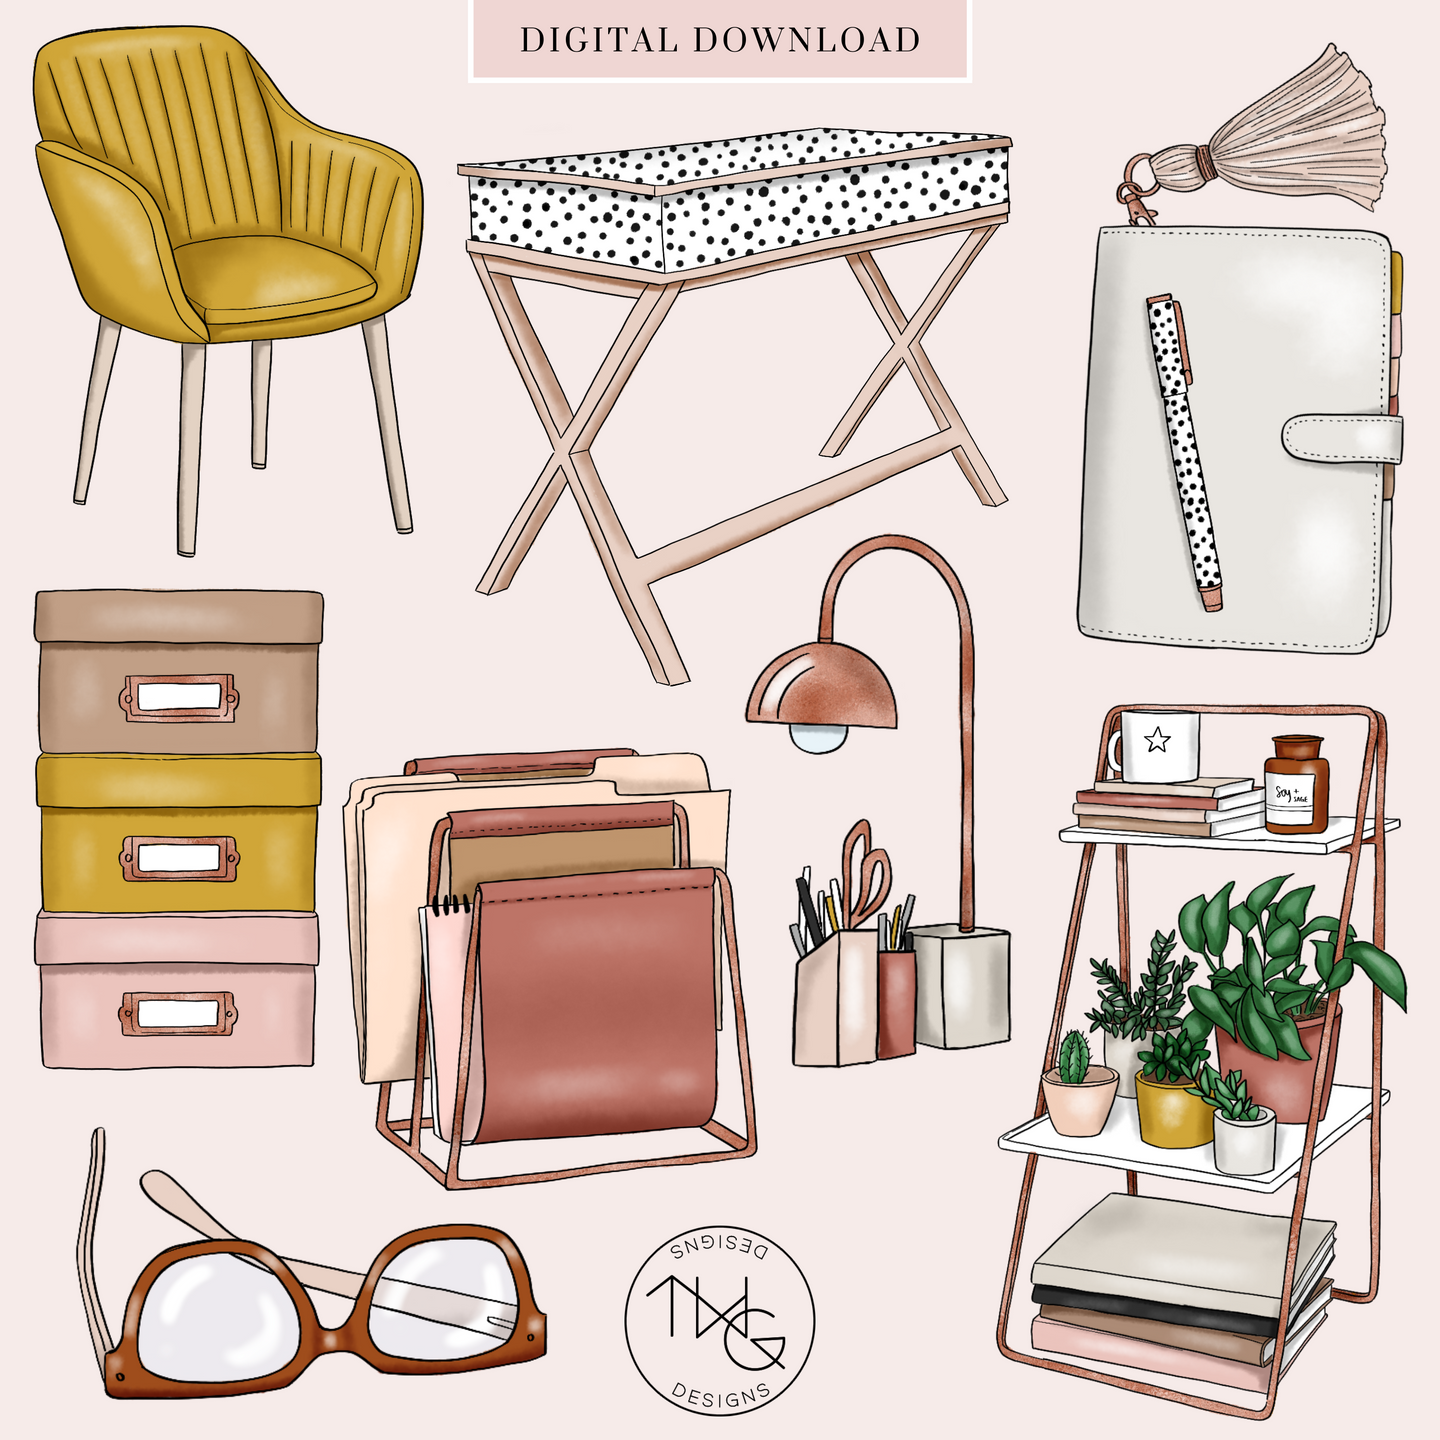 Moodboard Clipart Collection